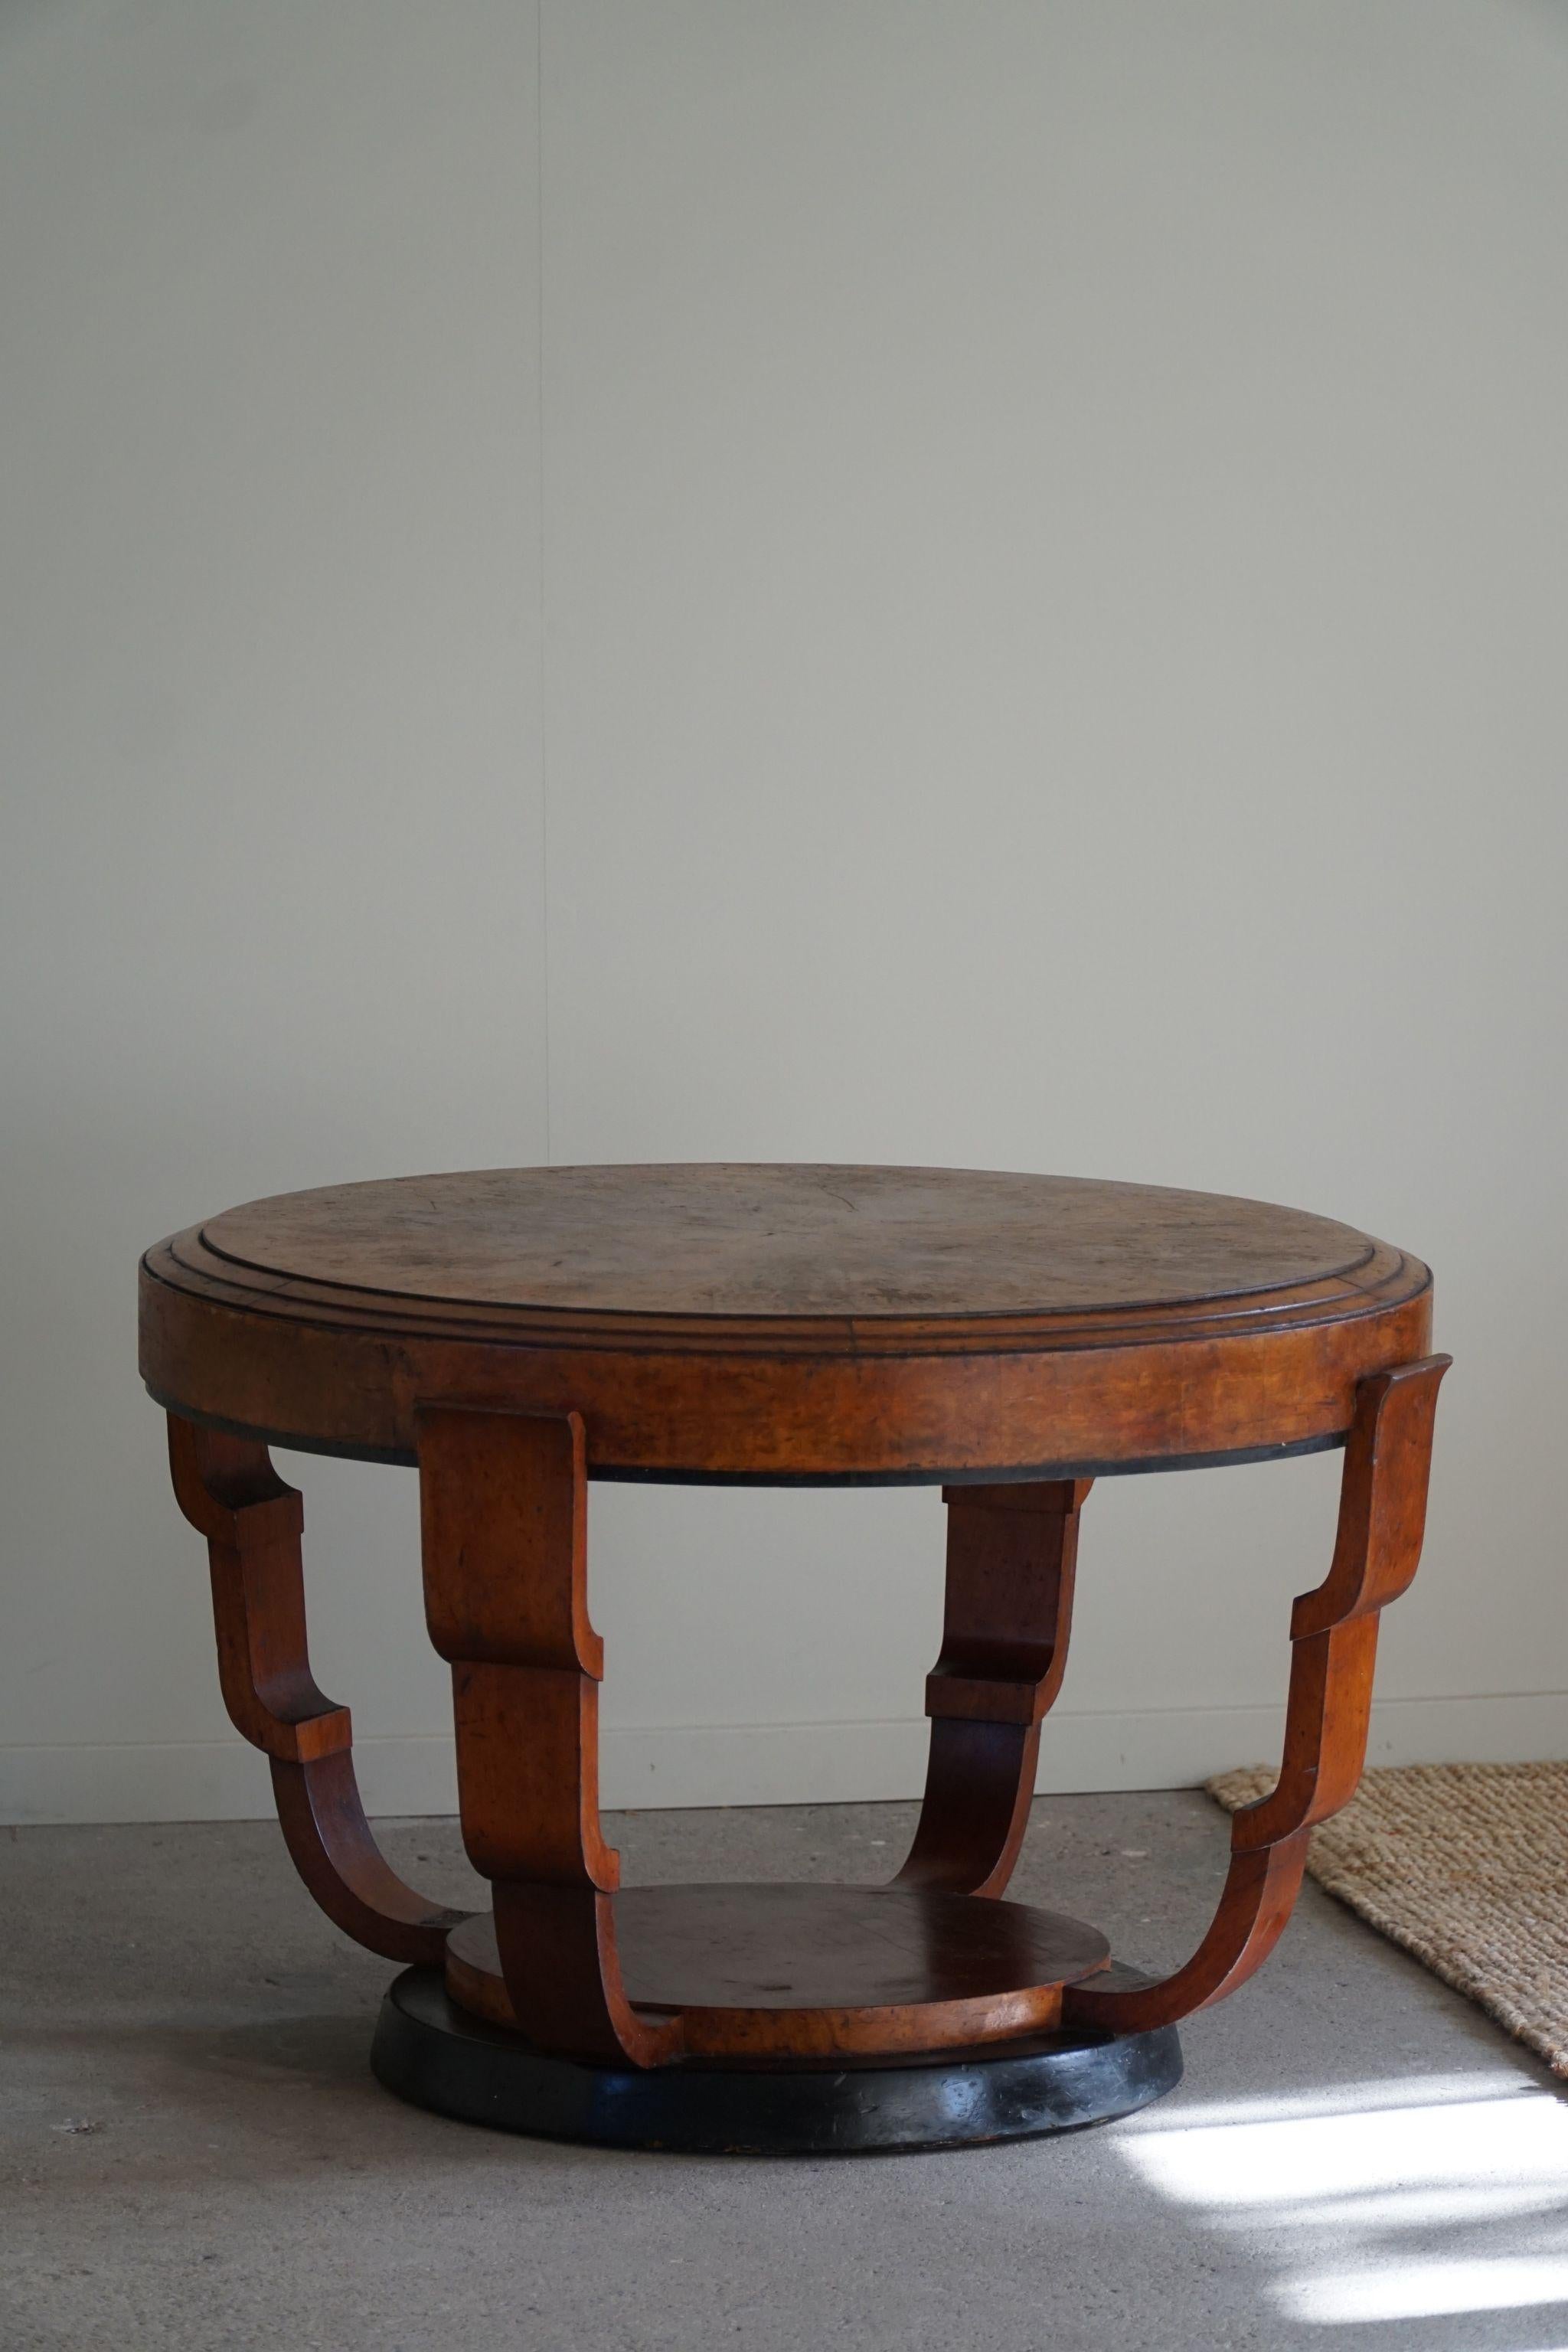 Art Deco, Large Round Sofa Table in Walnut, By a Danish Cabinetmaker, 1930s For Sale 9